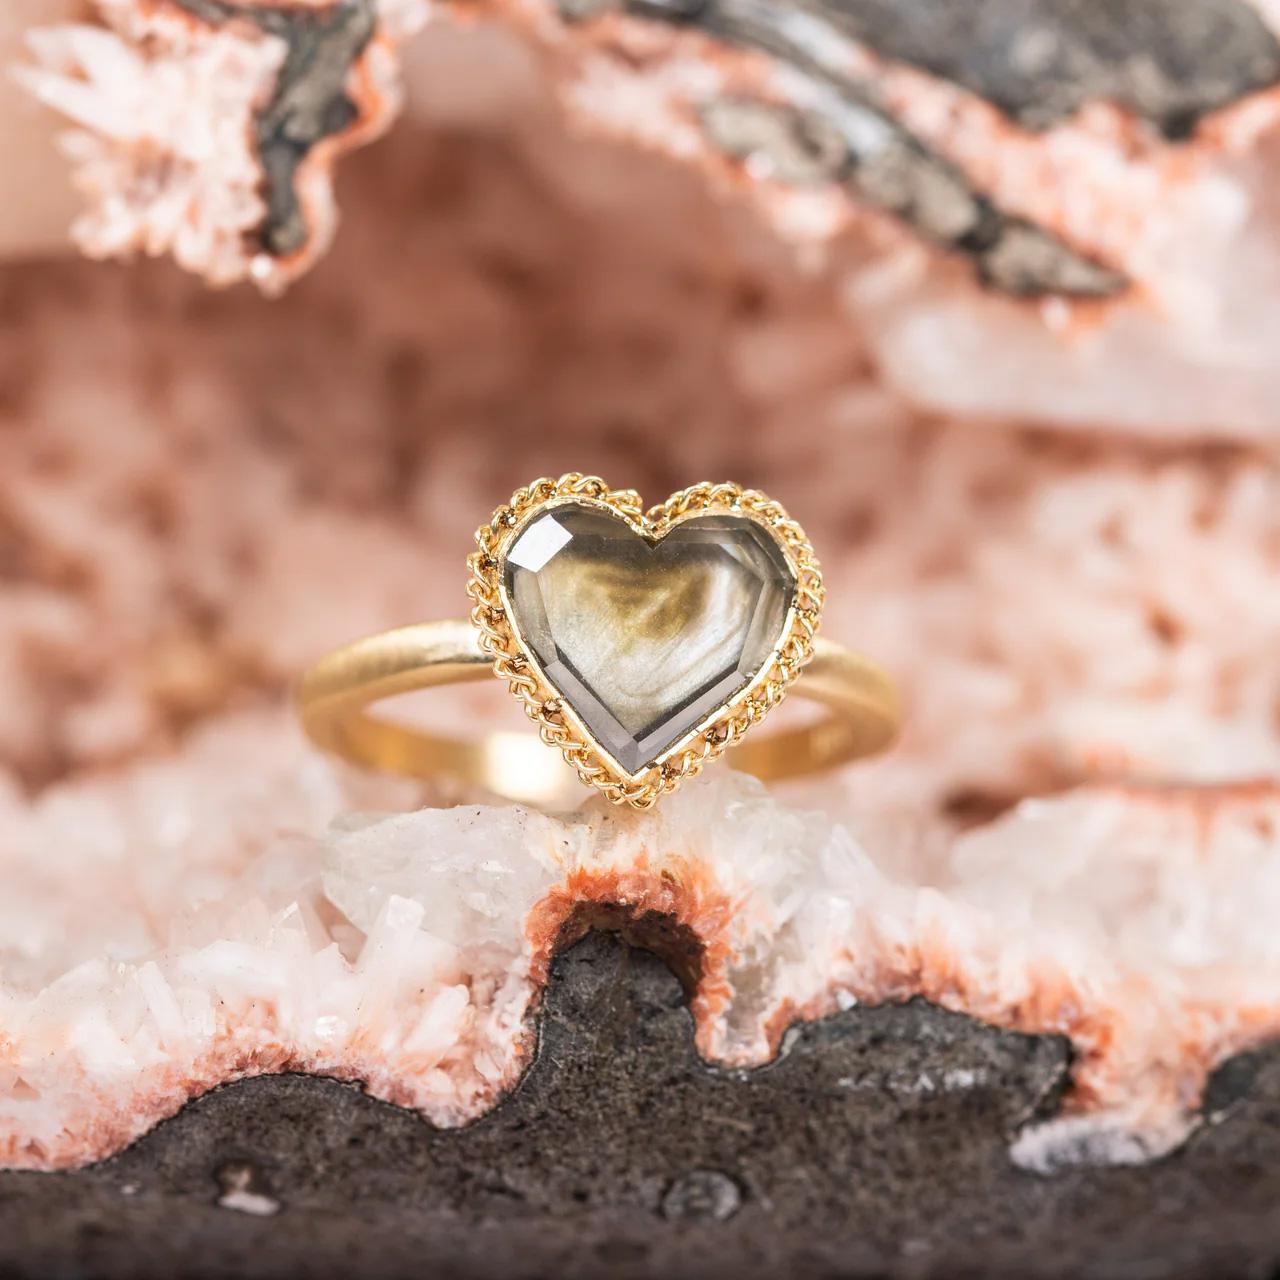 This extraordinary ring features a custom-cut Diamond in the shape of a heart. Its generous, subtle facets flicker with reflected light, a subtle dancing glimmer that comes alive with your every hand movement. This remarkable Diamond is set in a